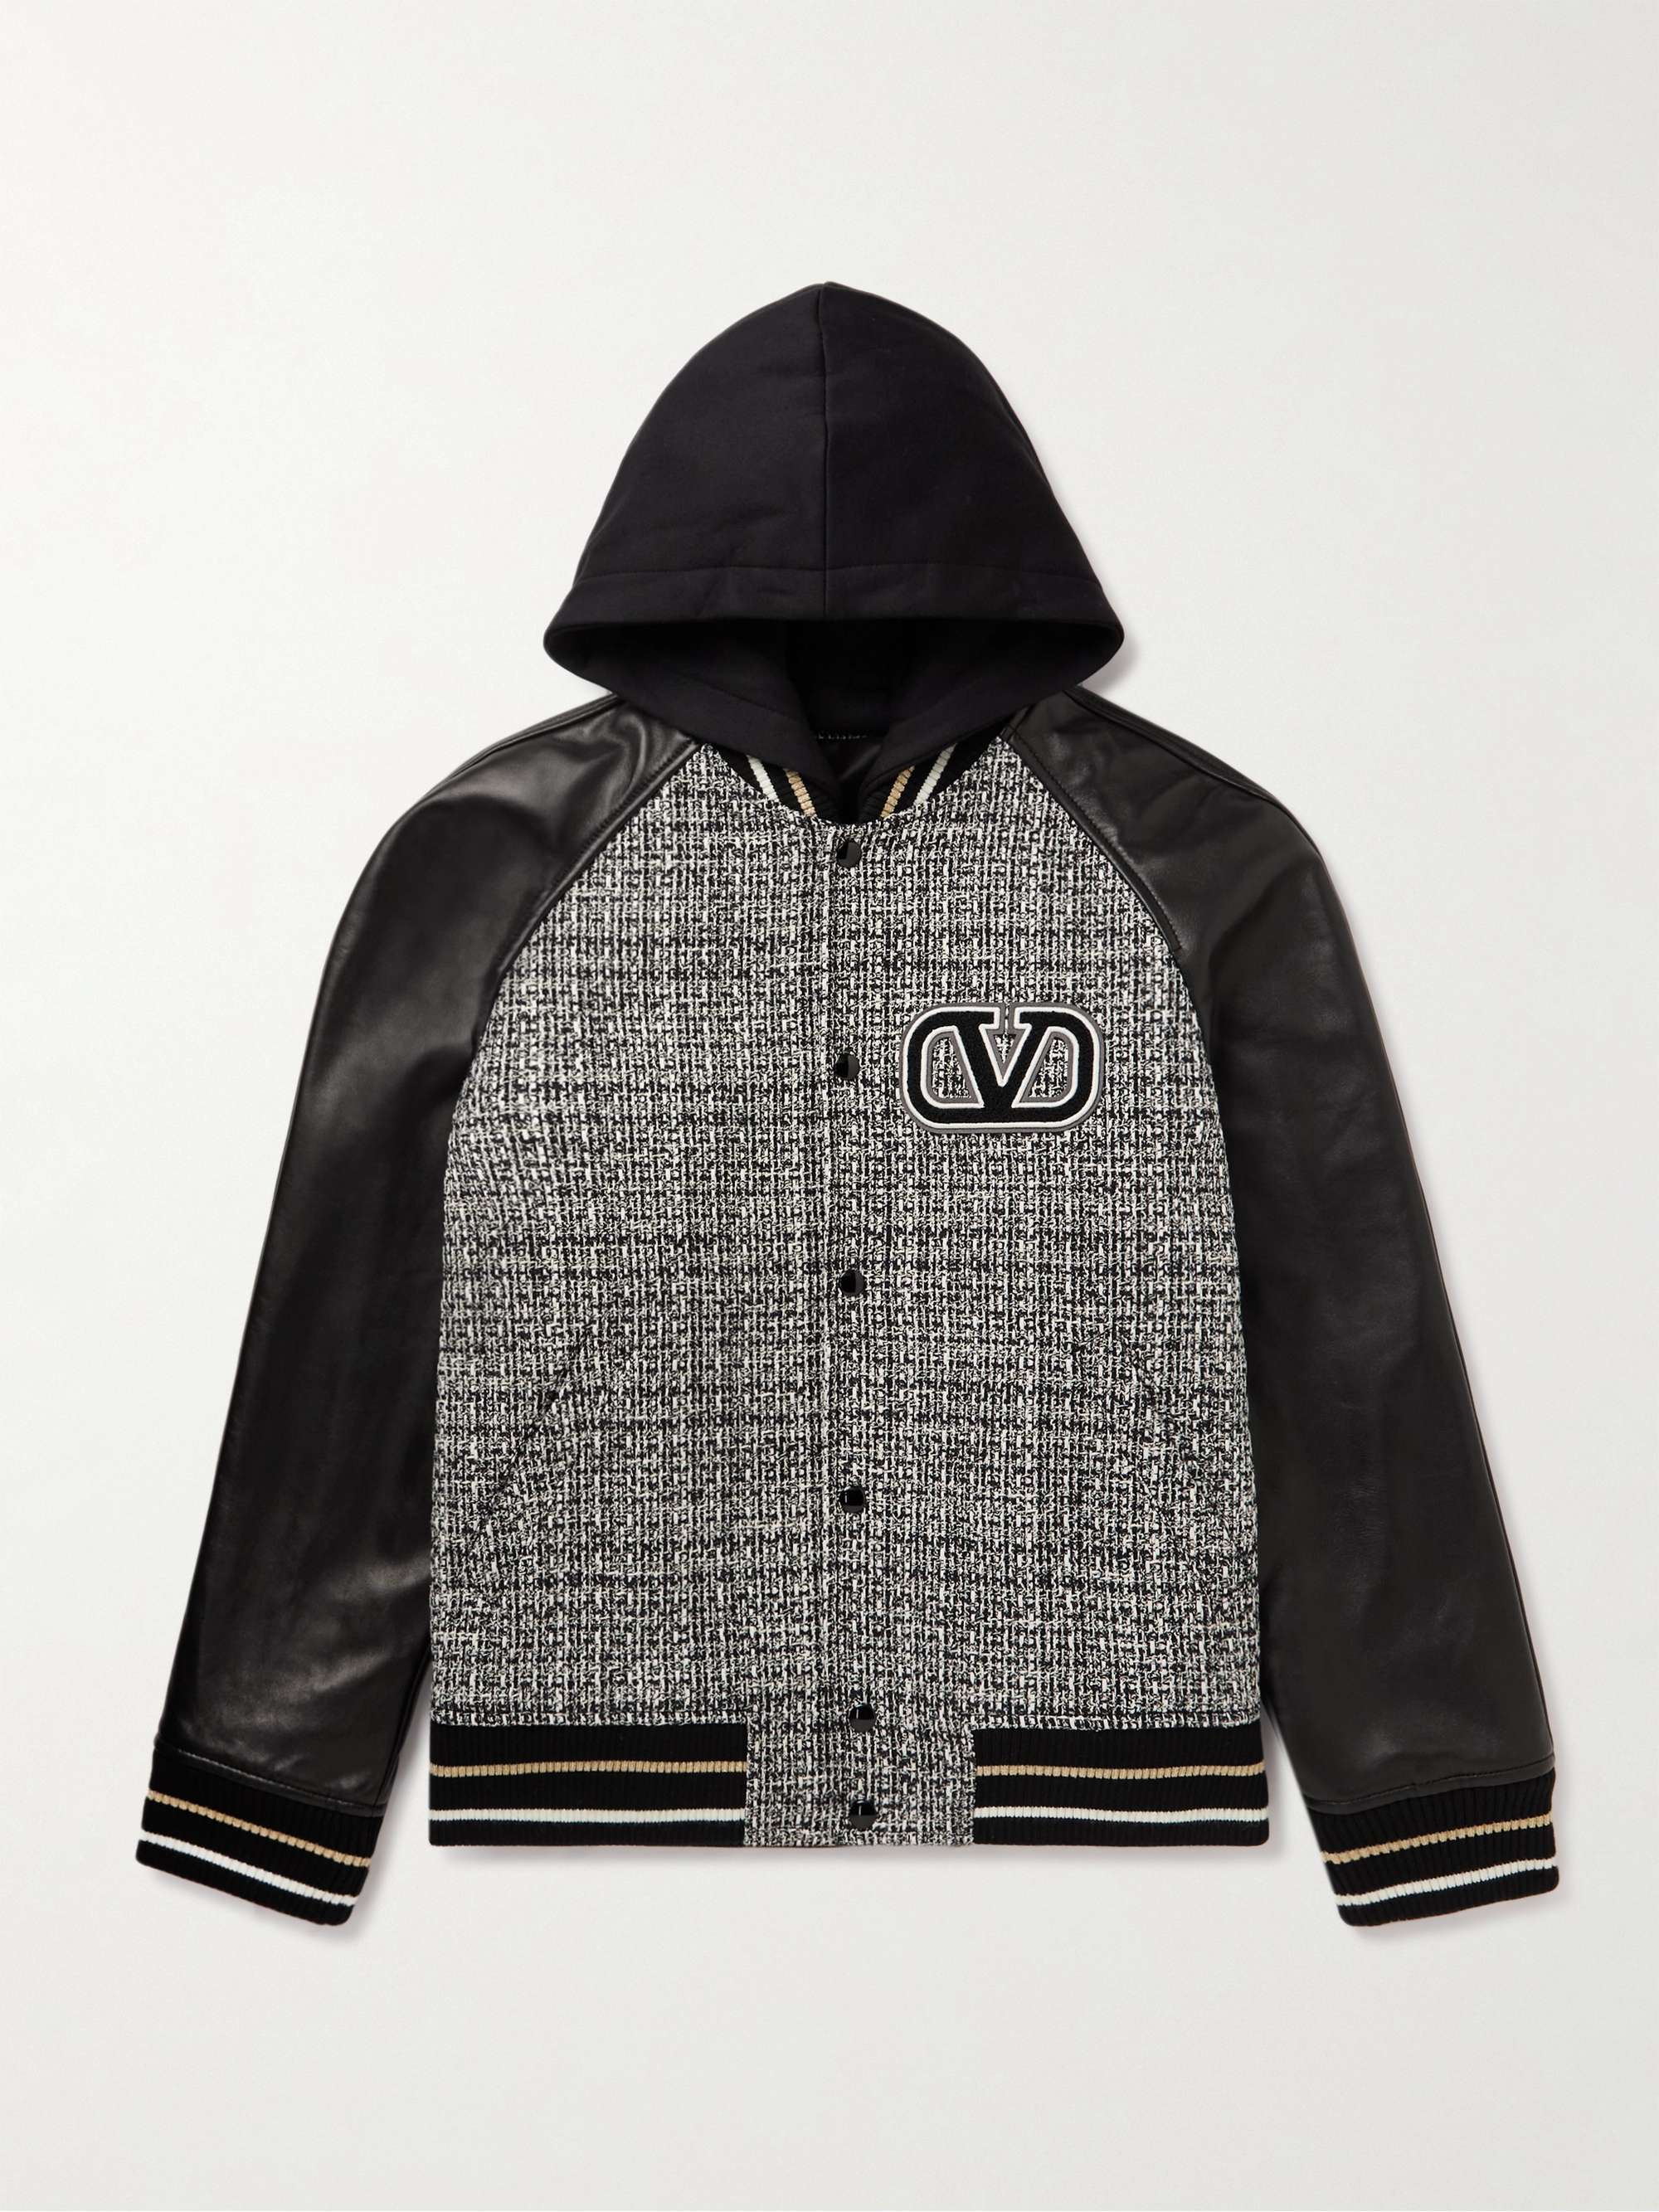 Valentino Garavani Cotton-blend bouclé-tweed and Leather Hooded Bomber Jacket - Men - Black Coats and Jackets - M